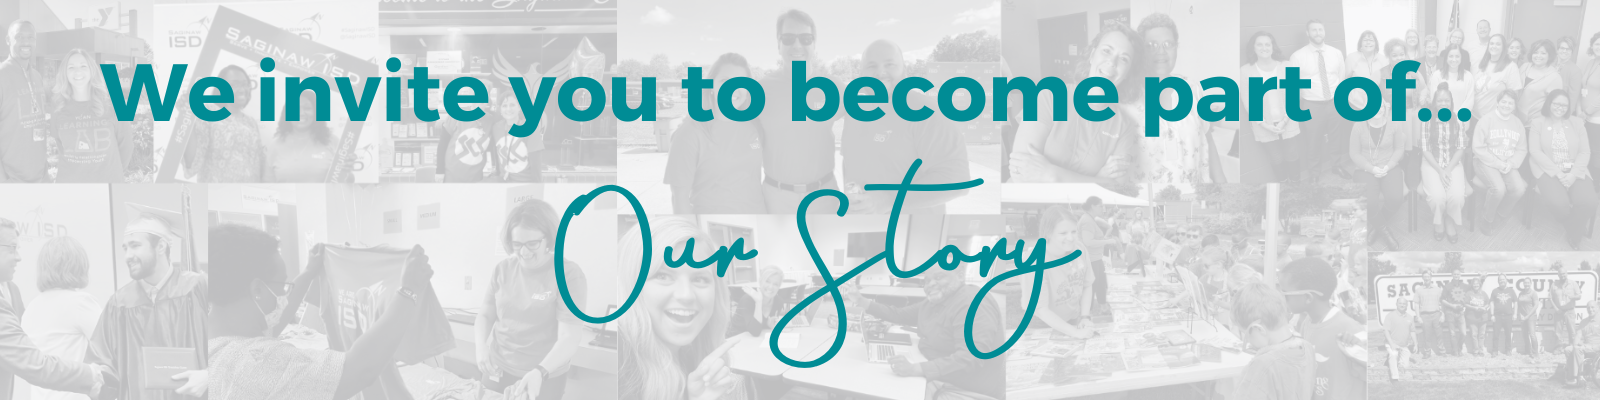 We invite you to become part of Our Story